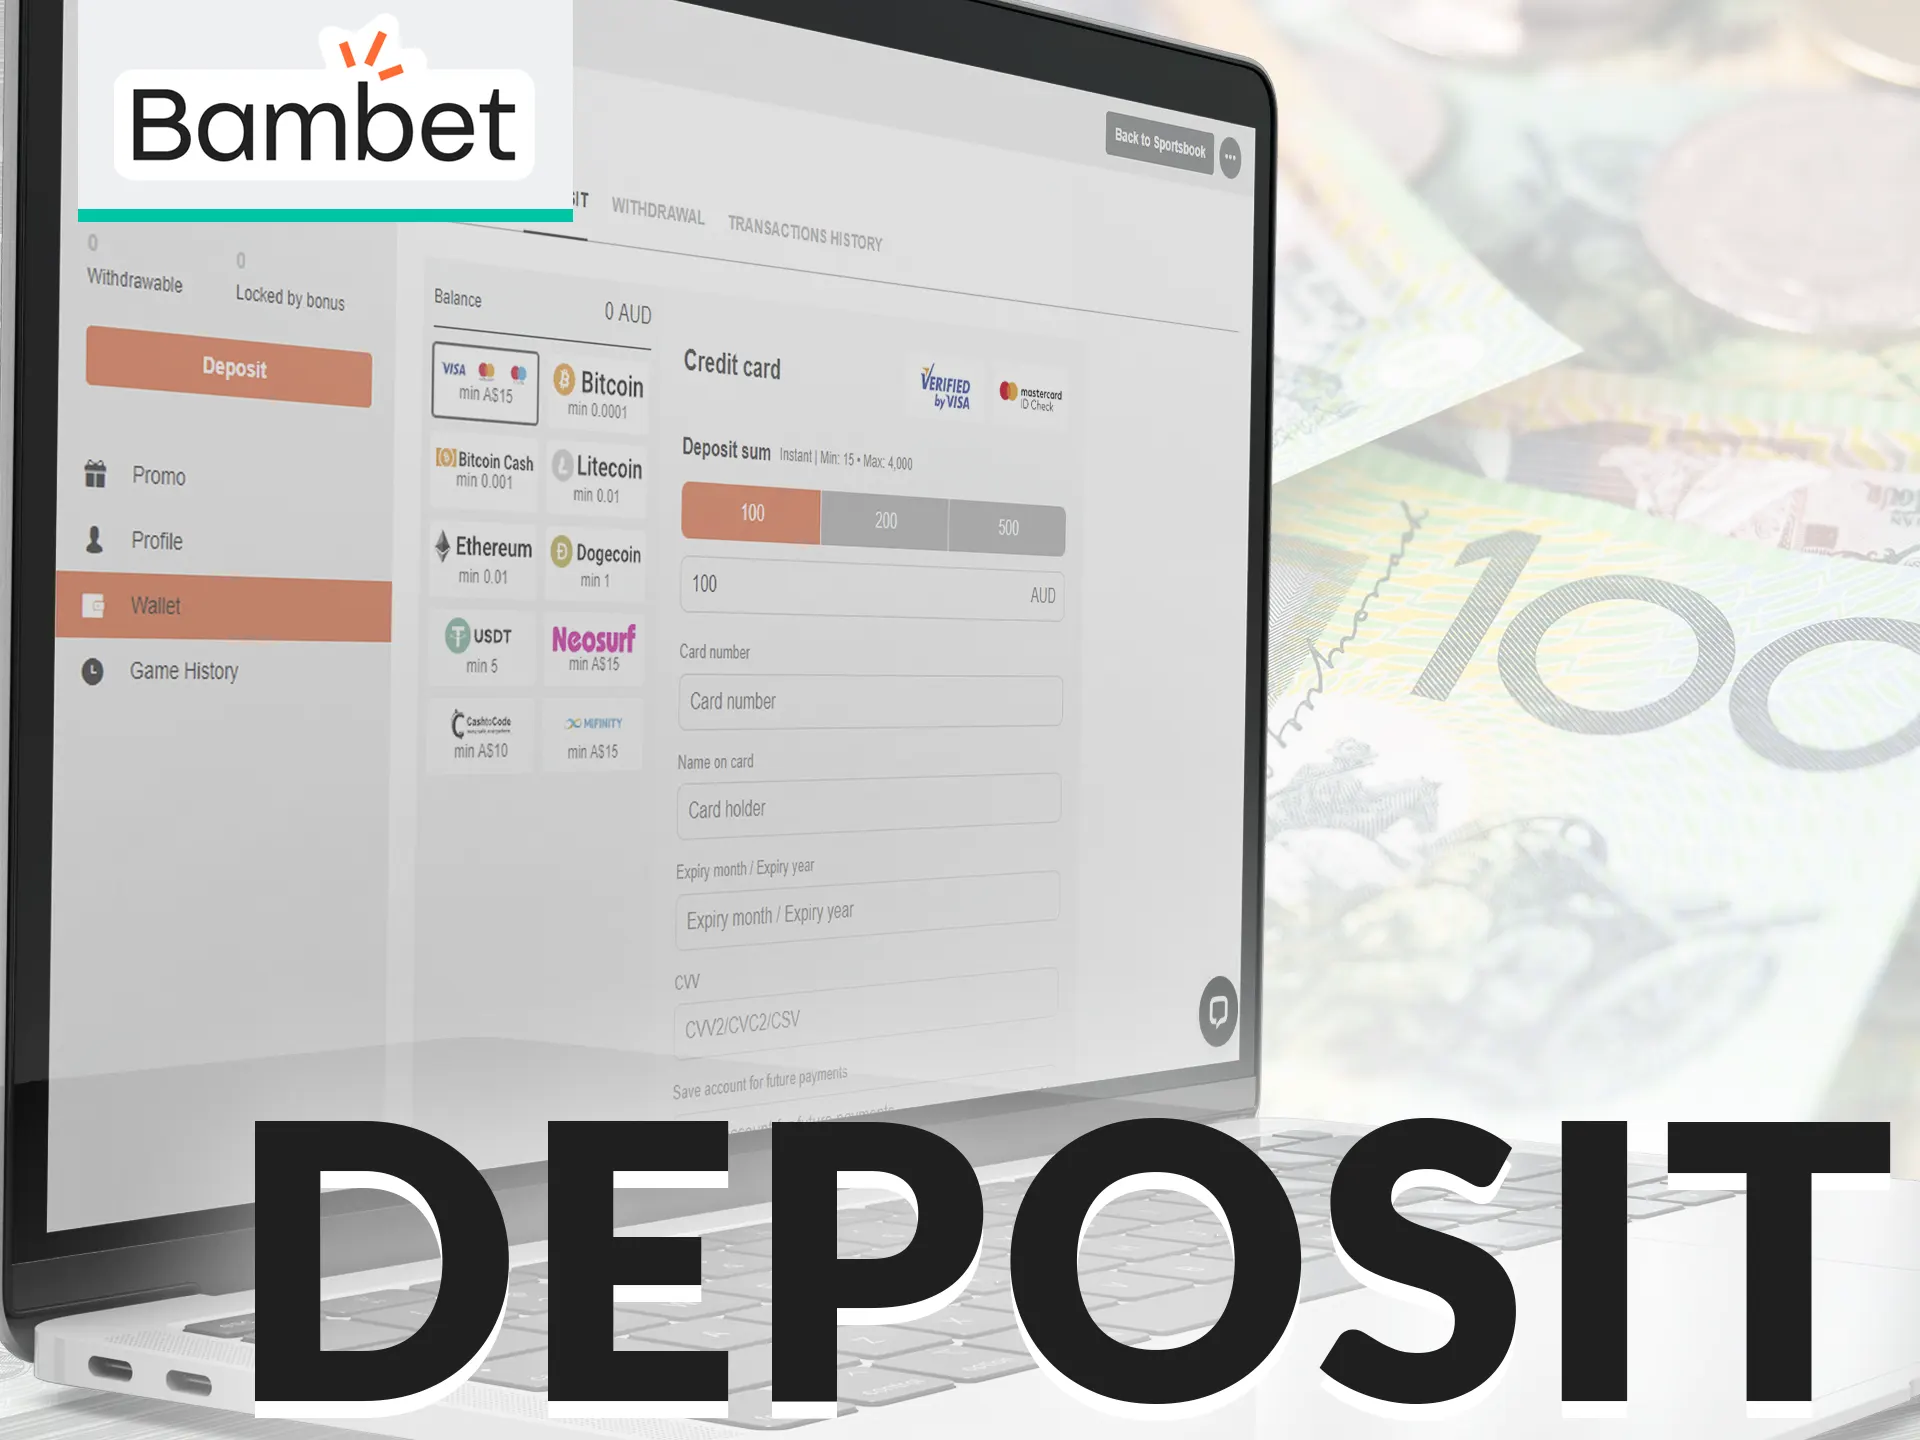 Australia's popular deposit methods include credit/debit cards and wire transfers, ensuring convenience and security.